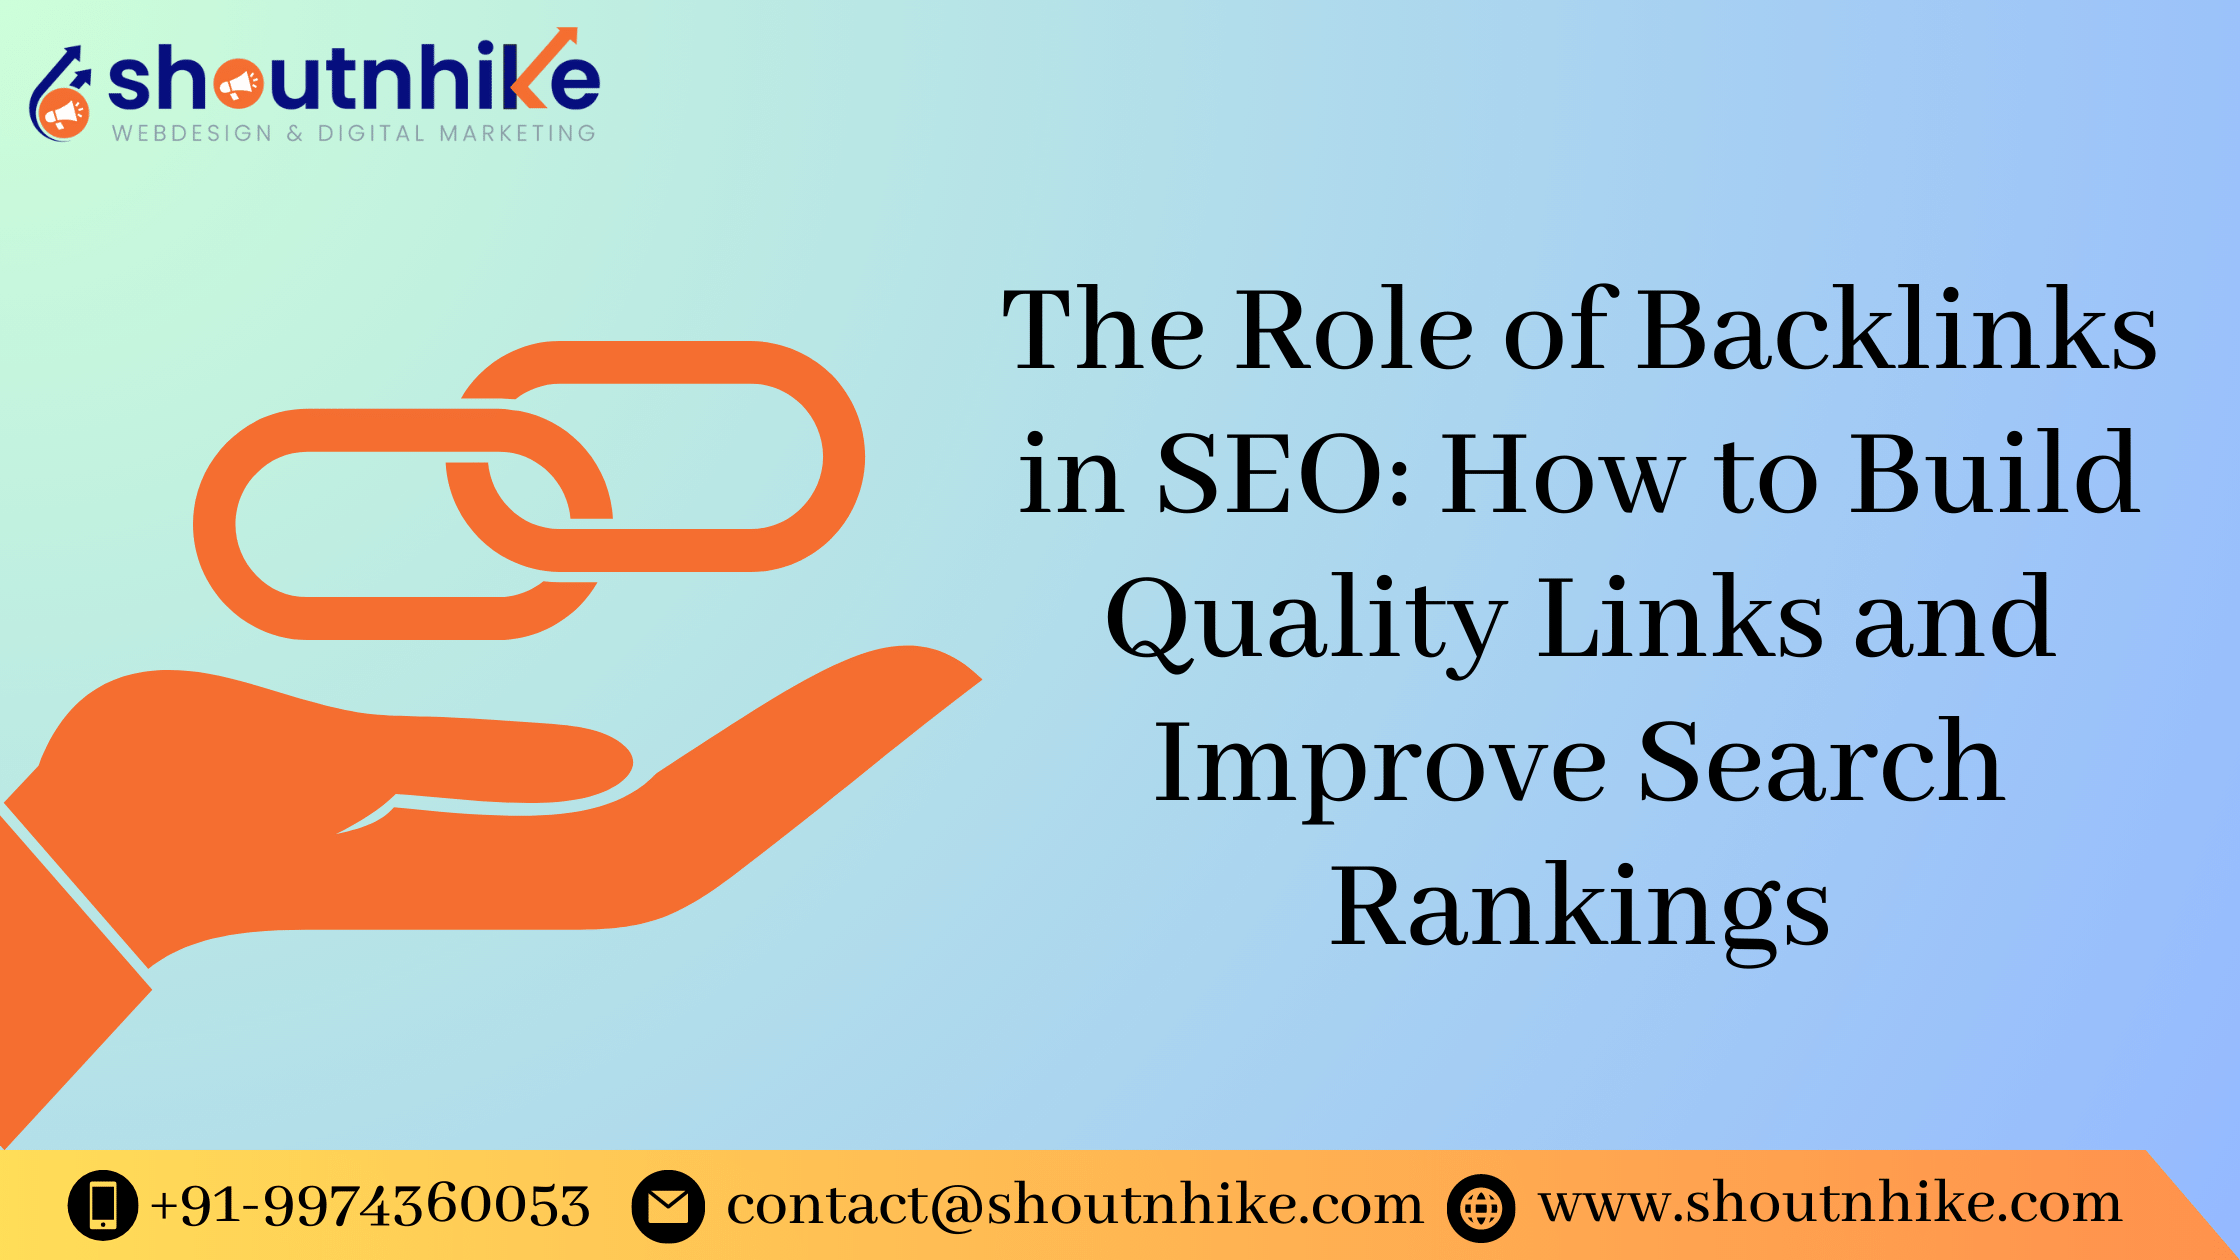 The Role of Backlinks in SEO: How to Build Quality Links and Improve Search Rankings